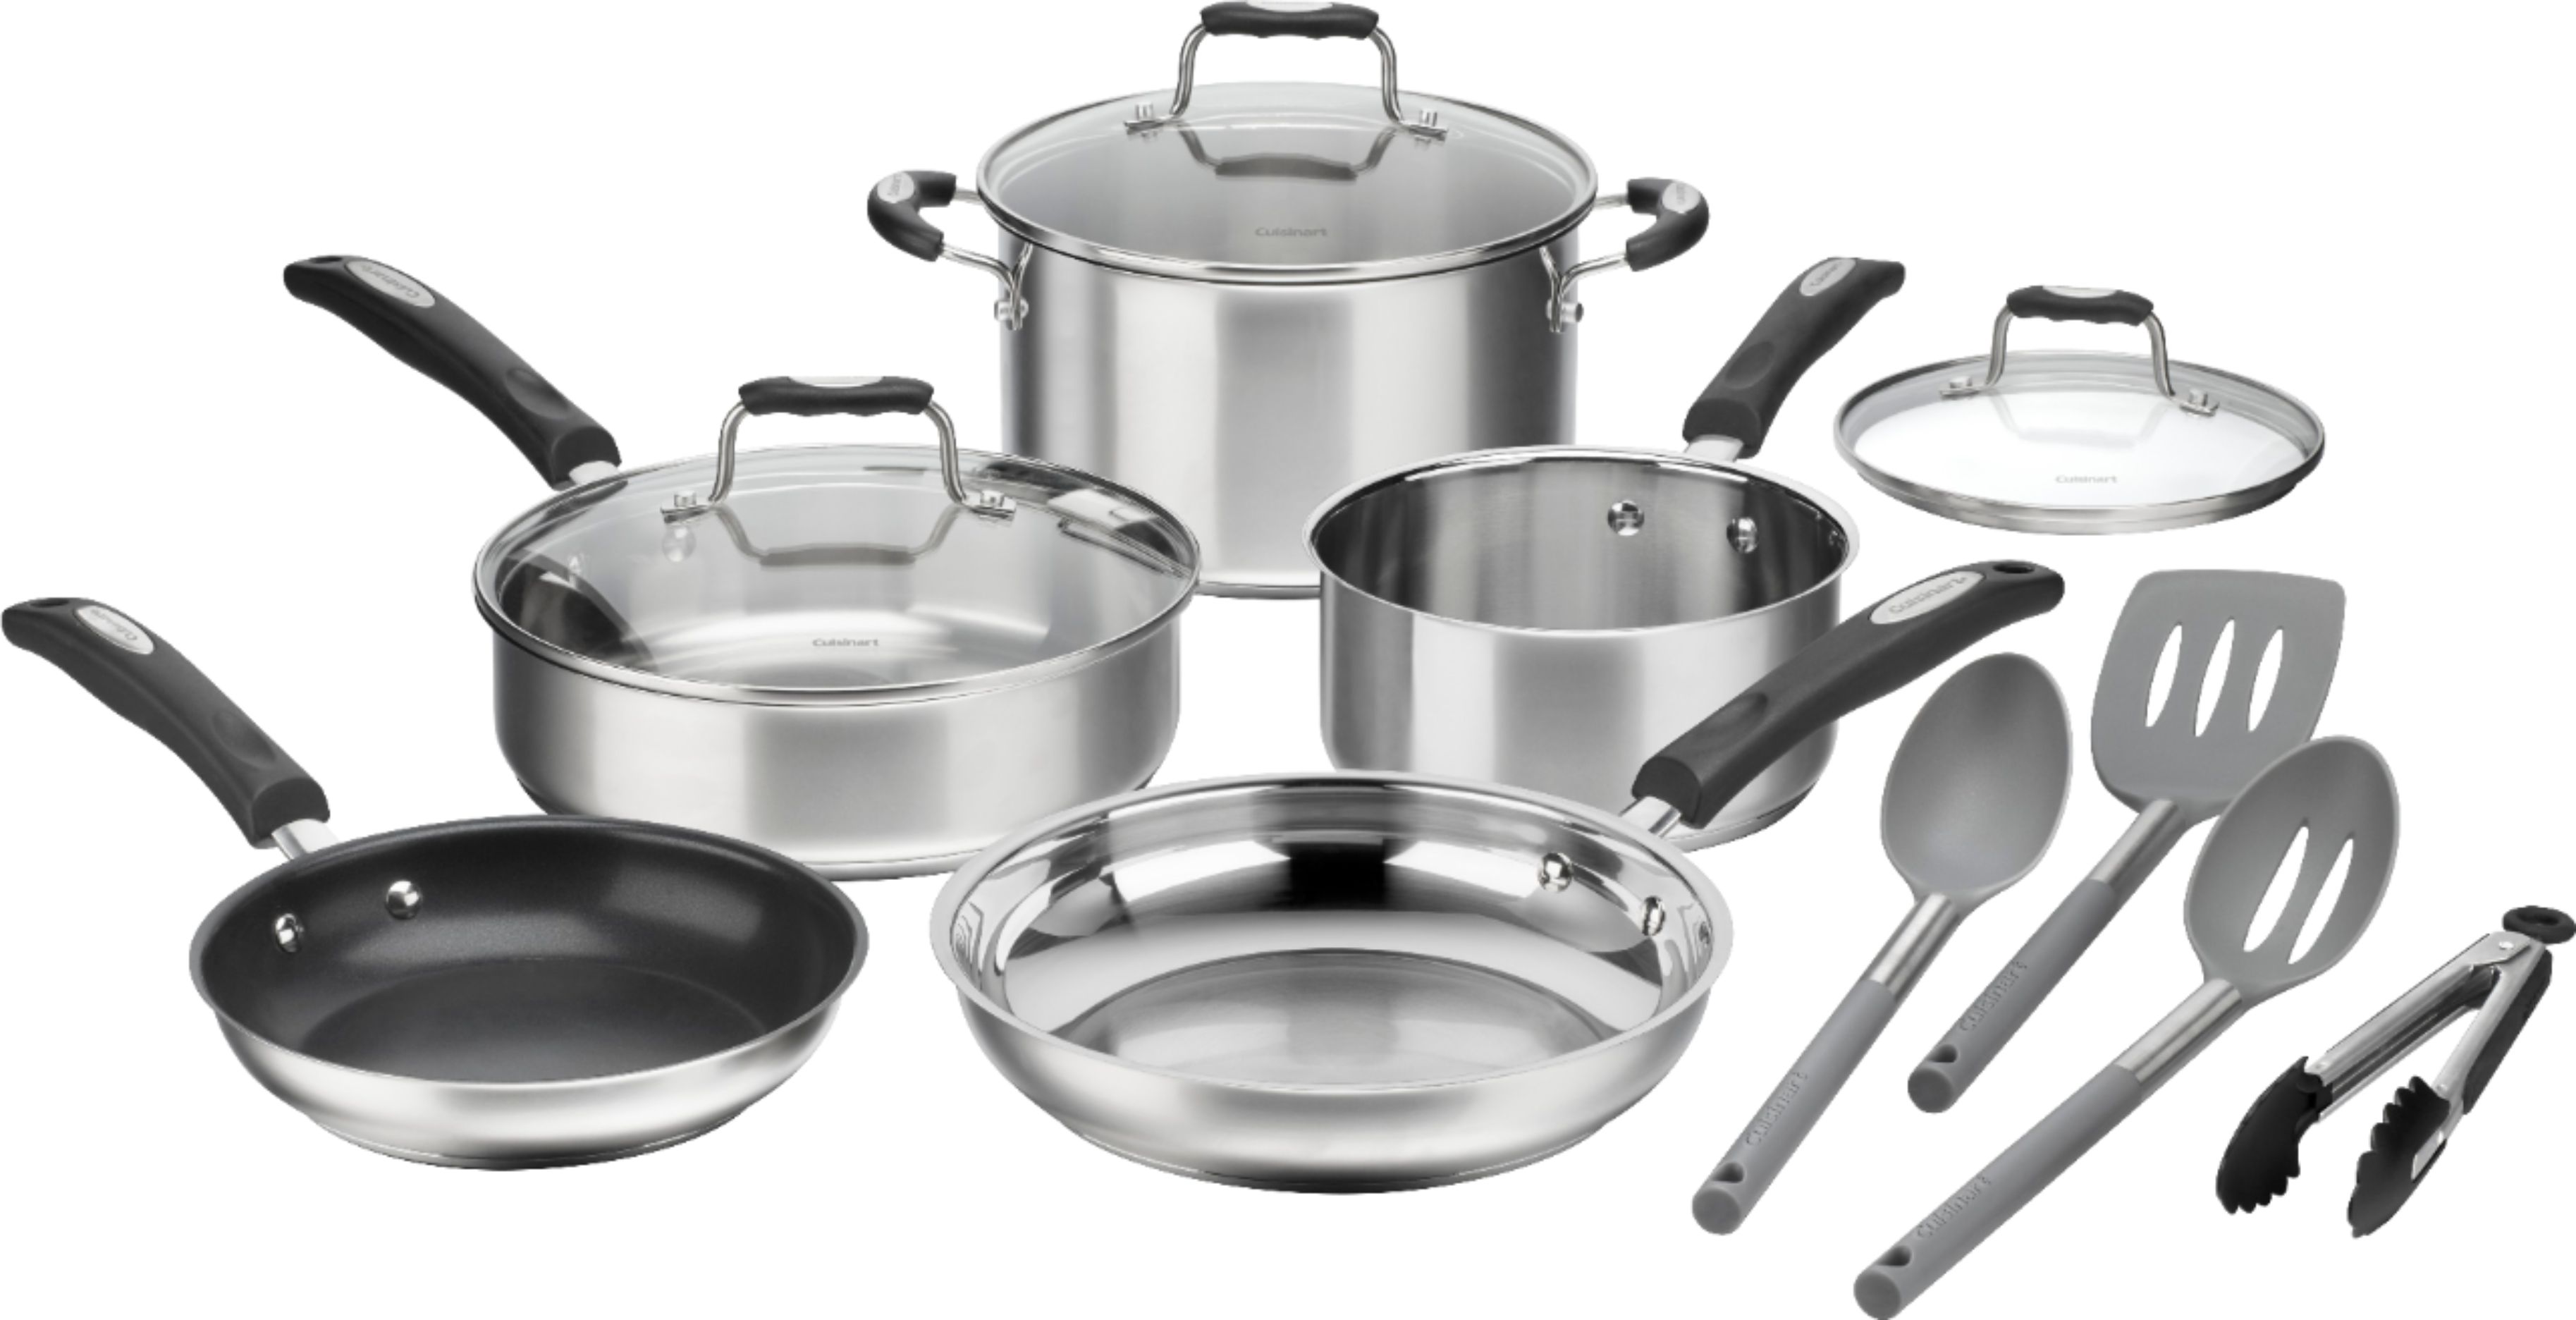 Stainless Steel Cookware Sets, Pots and Pans